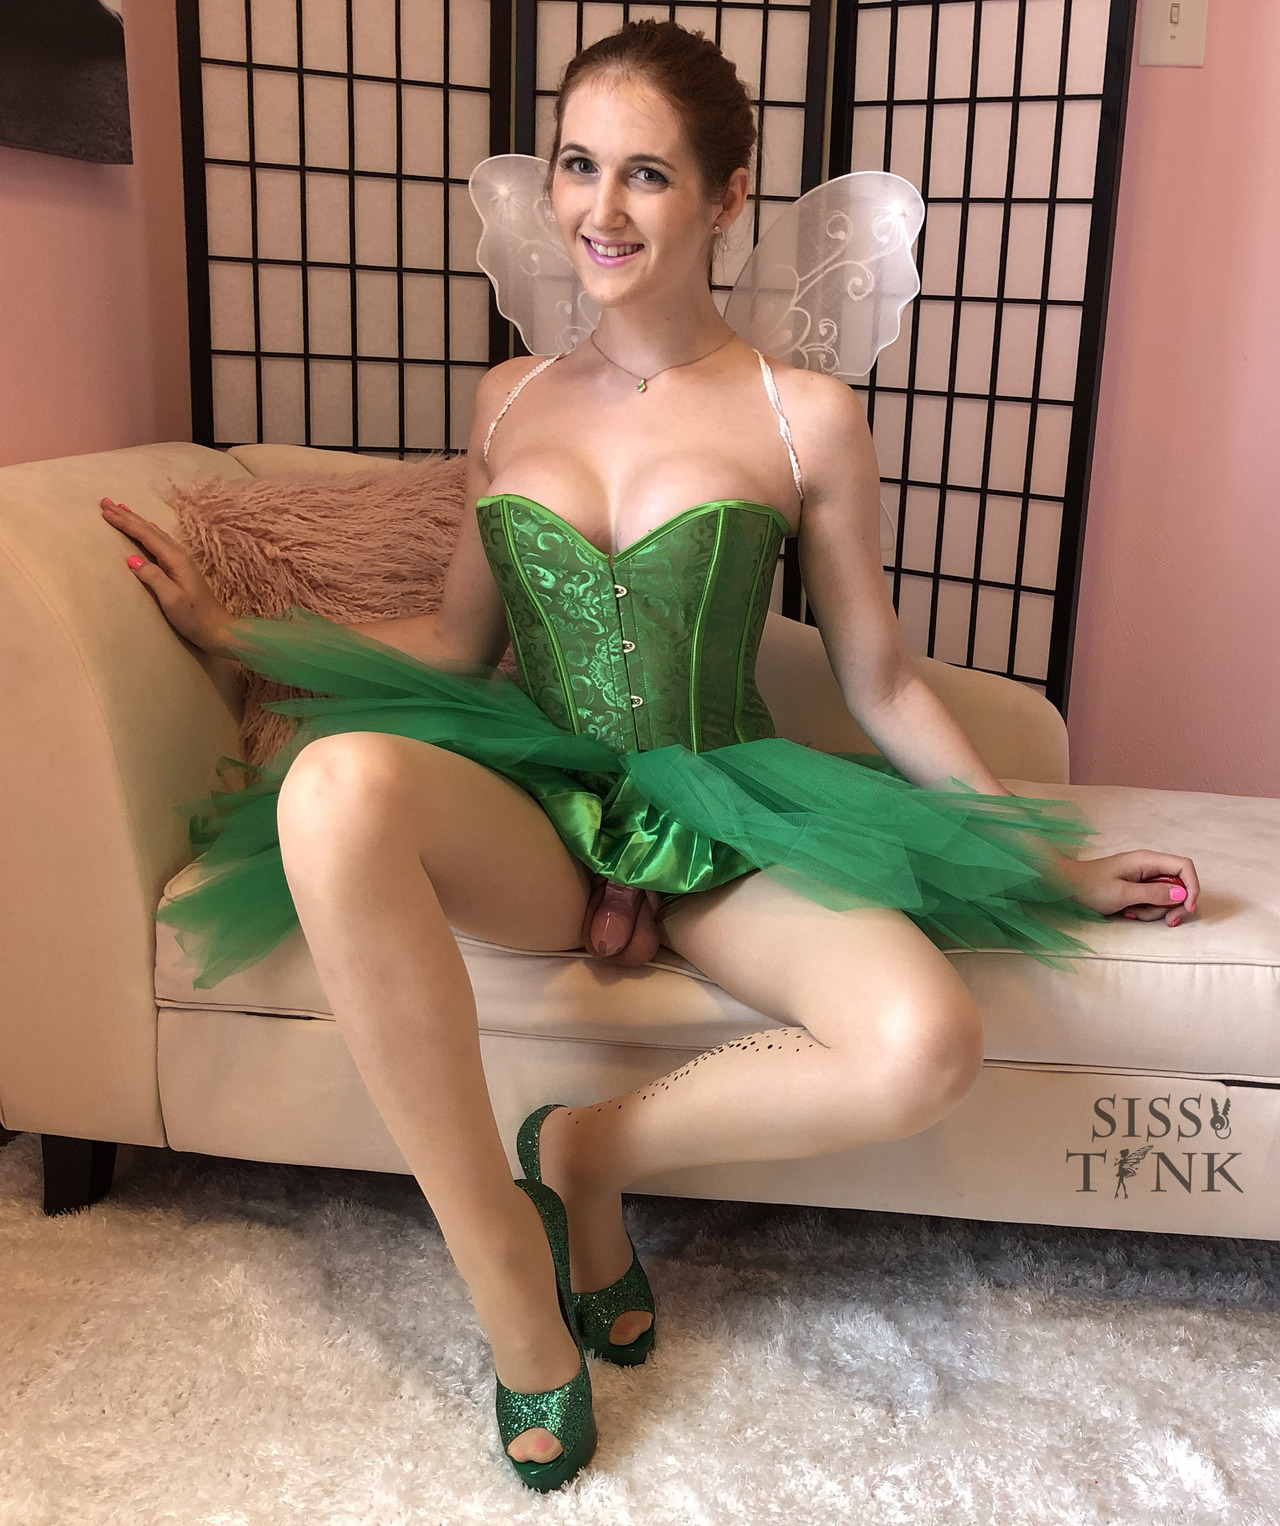 sissytink: Sissy Tink has finally arrived! I absolutely LOVED doing this set and